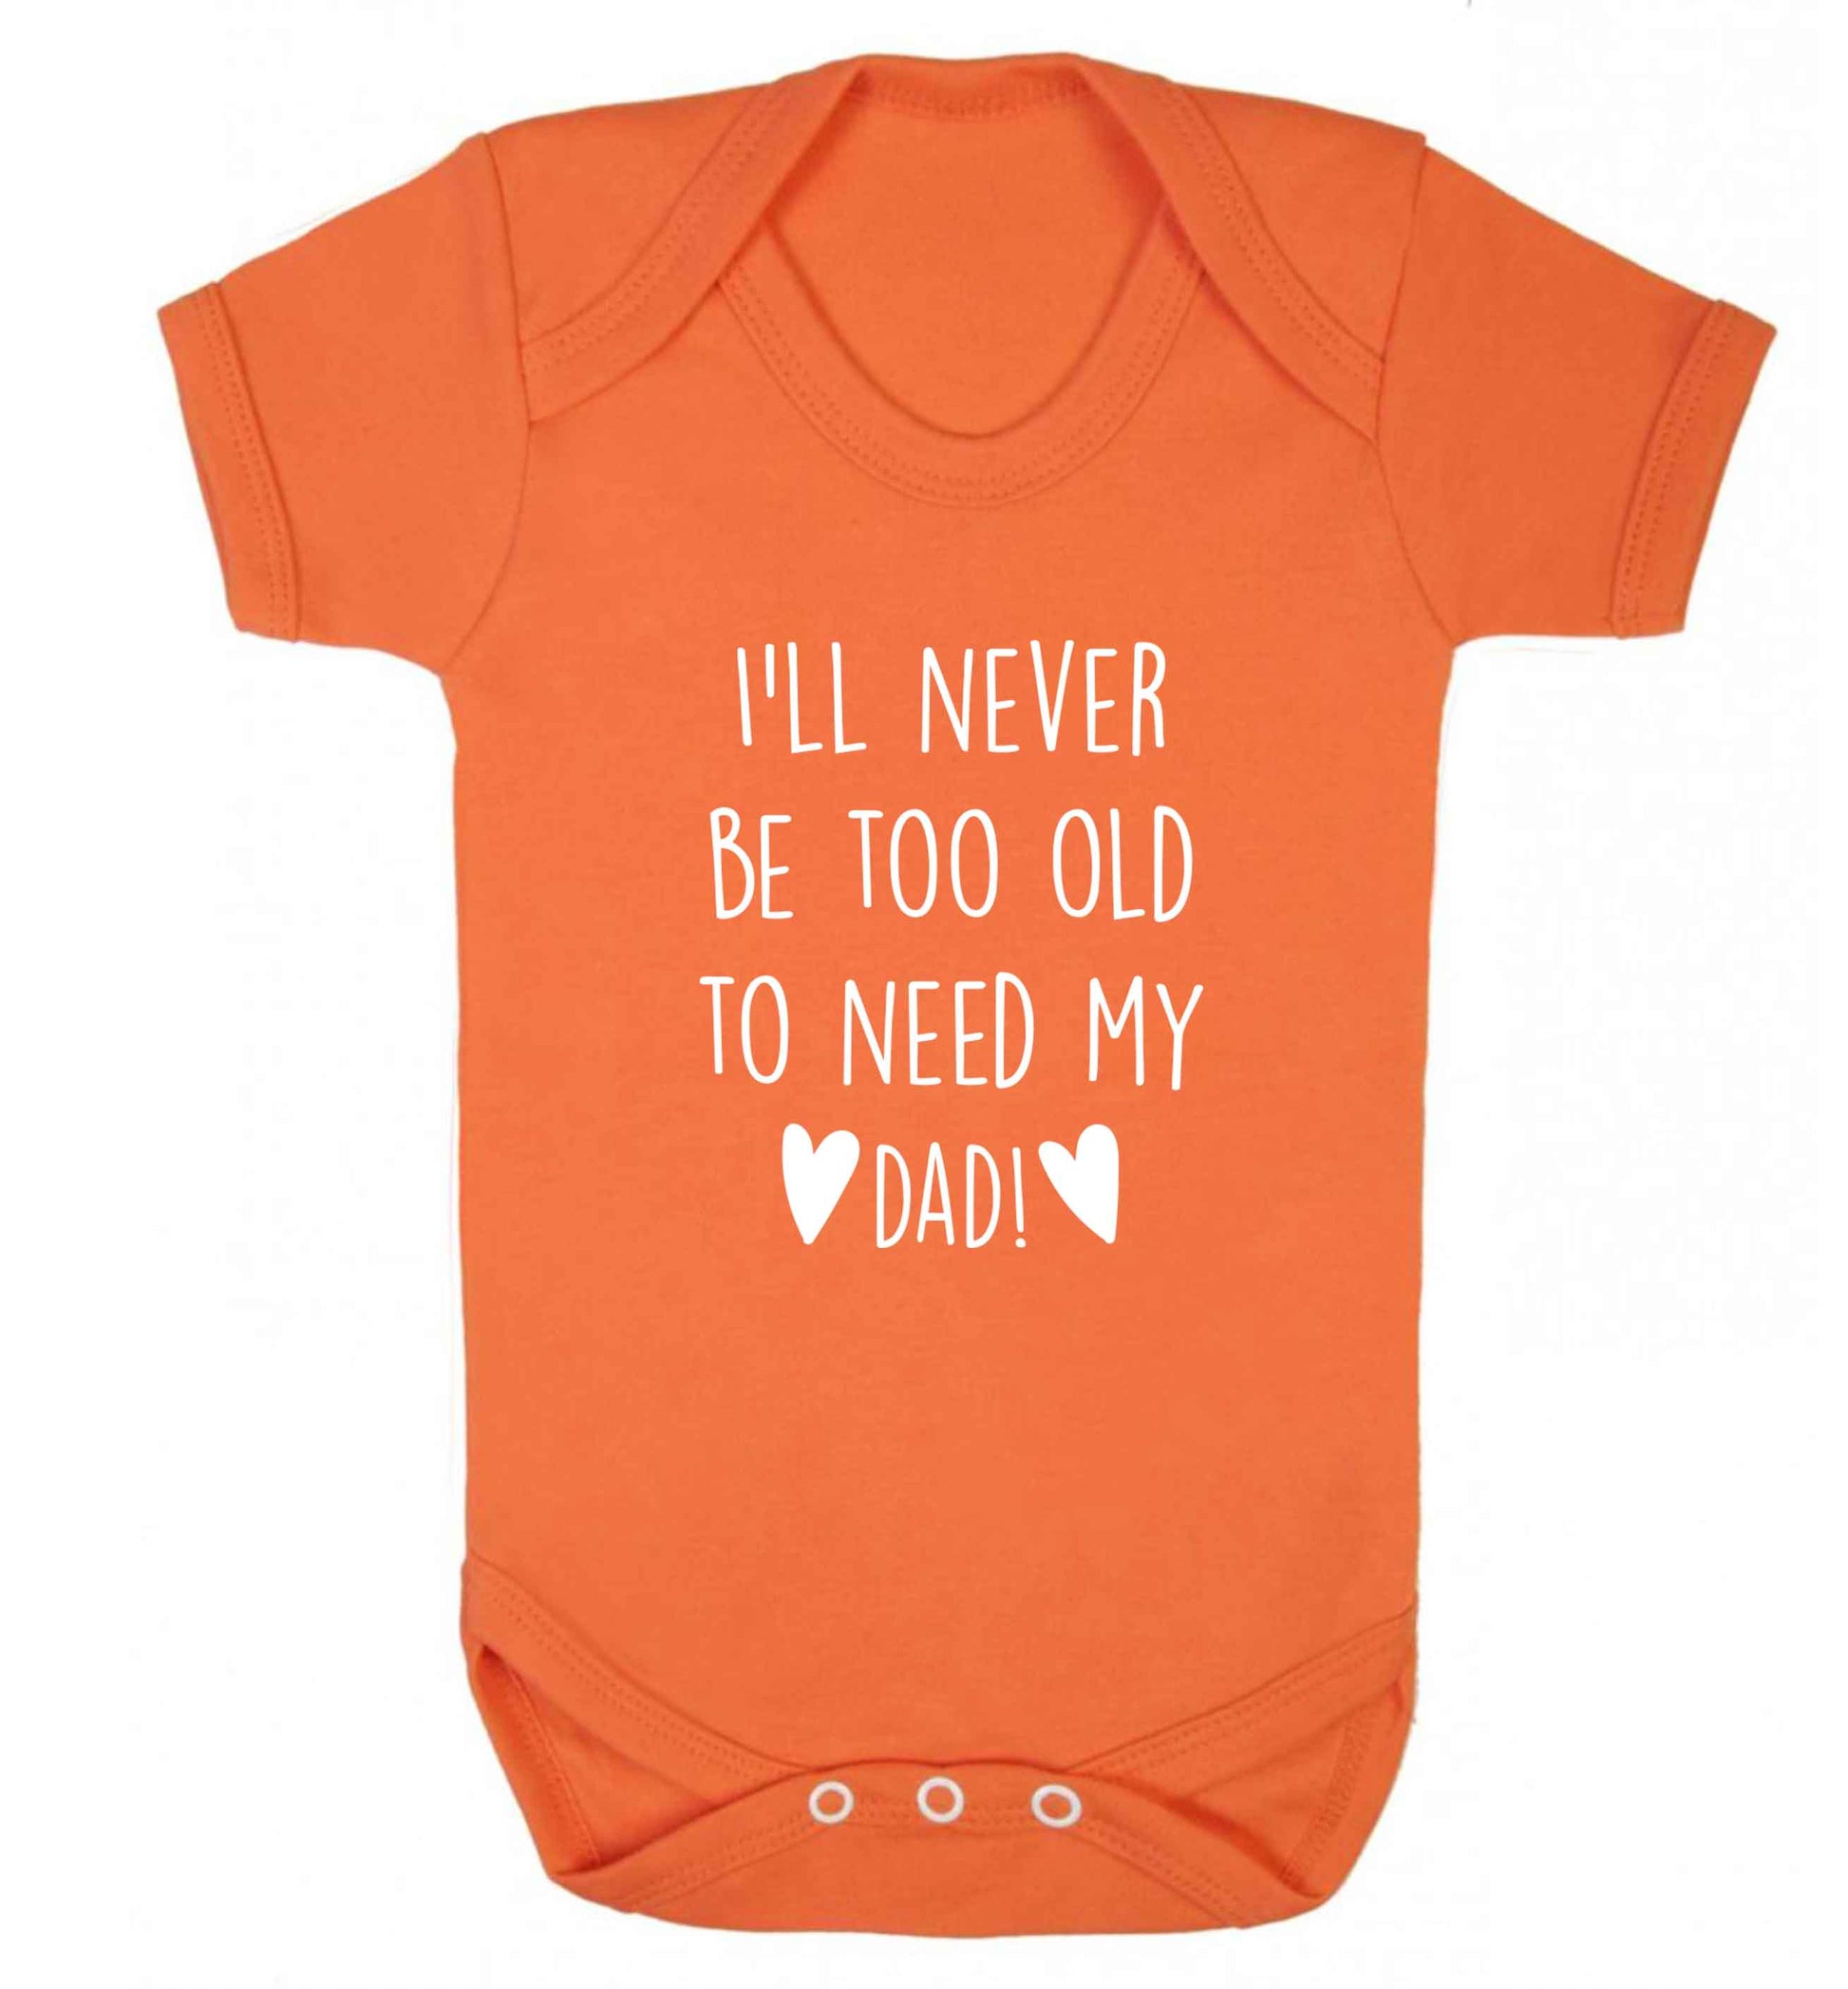 I'll never be too old to need my dad baby vest orange 18-24 months